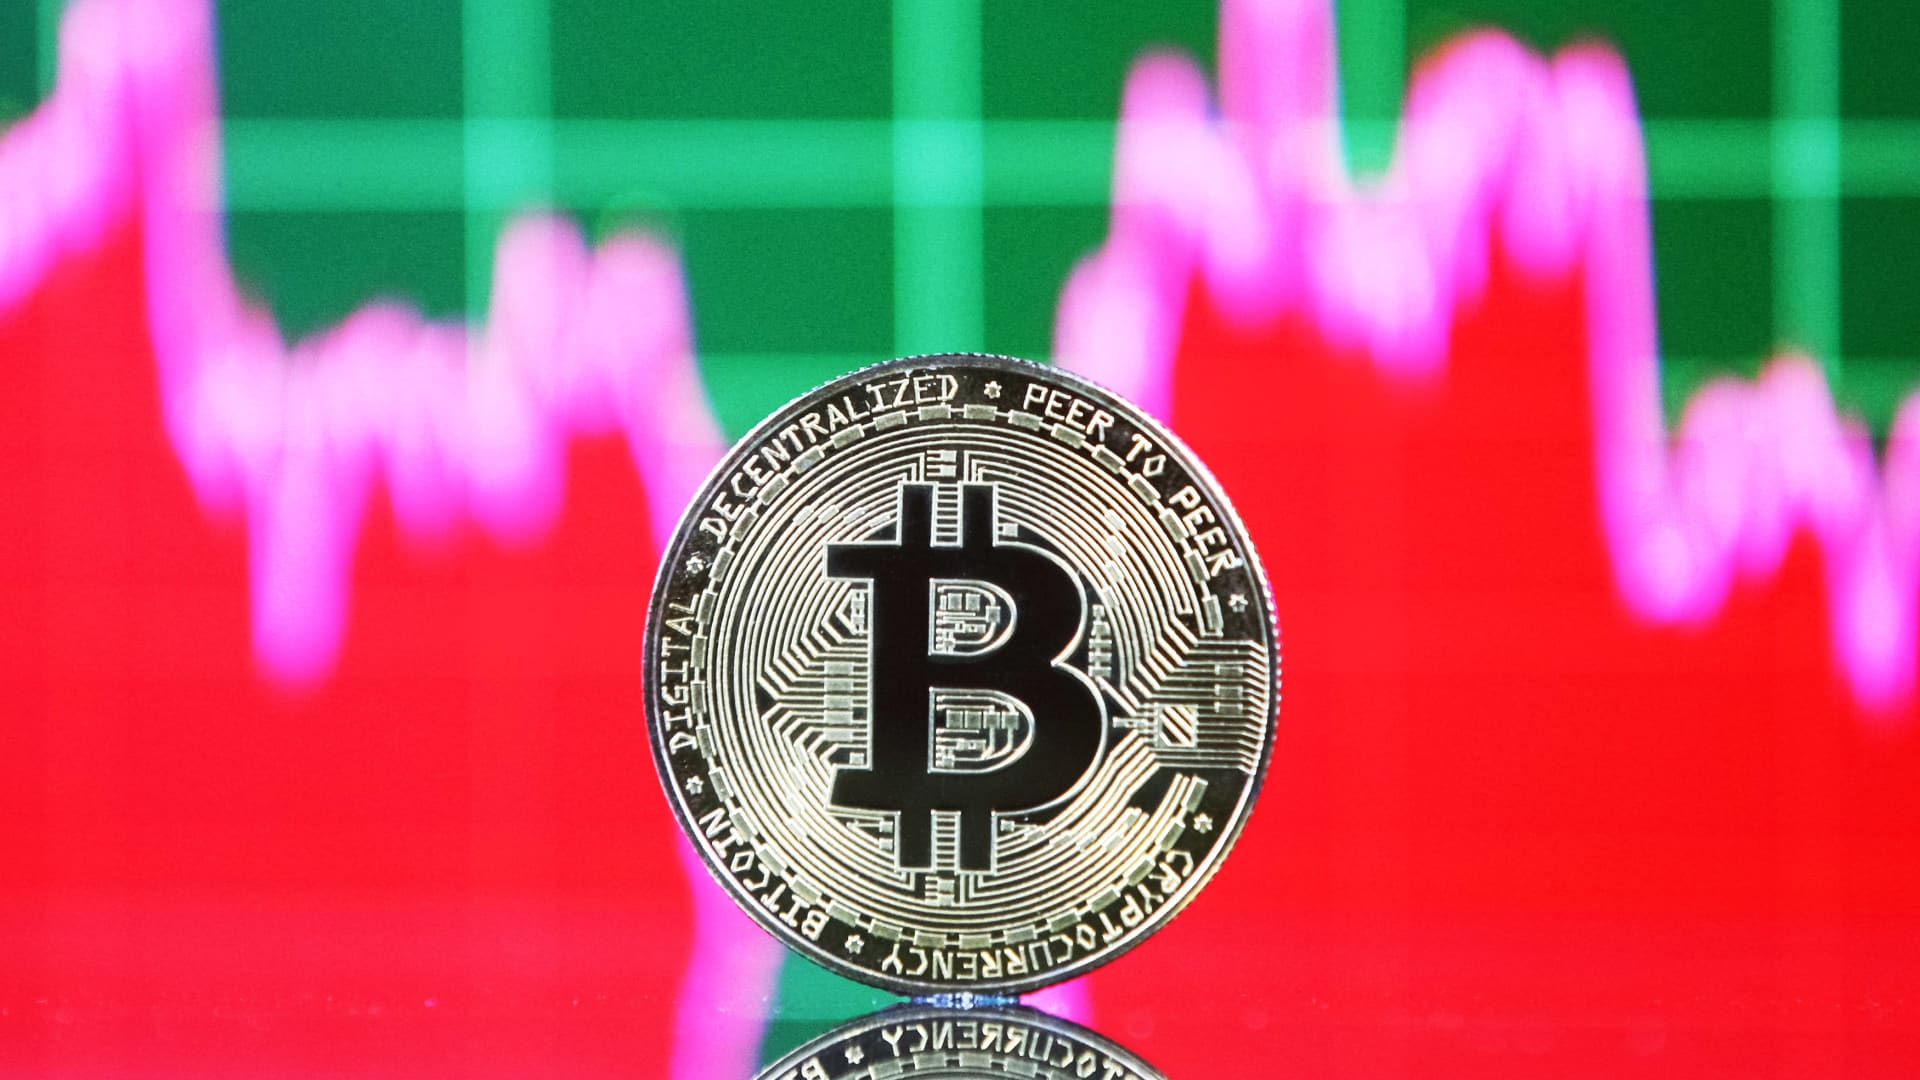 Bitcoin (BTC) price surges to top ,000 even as stocks hit 2022 lows